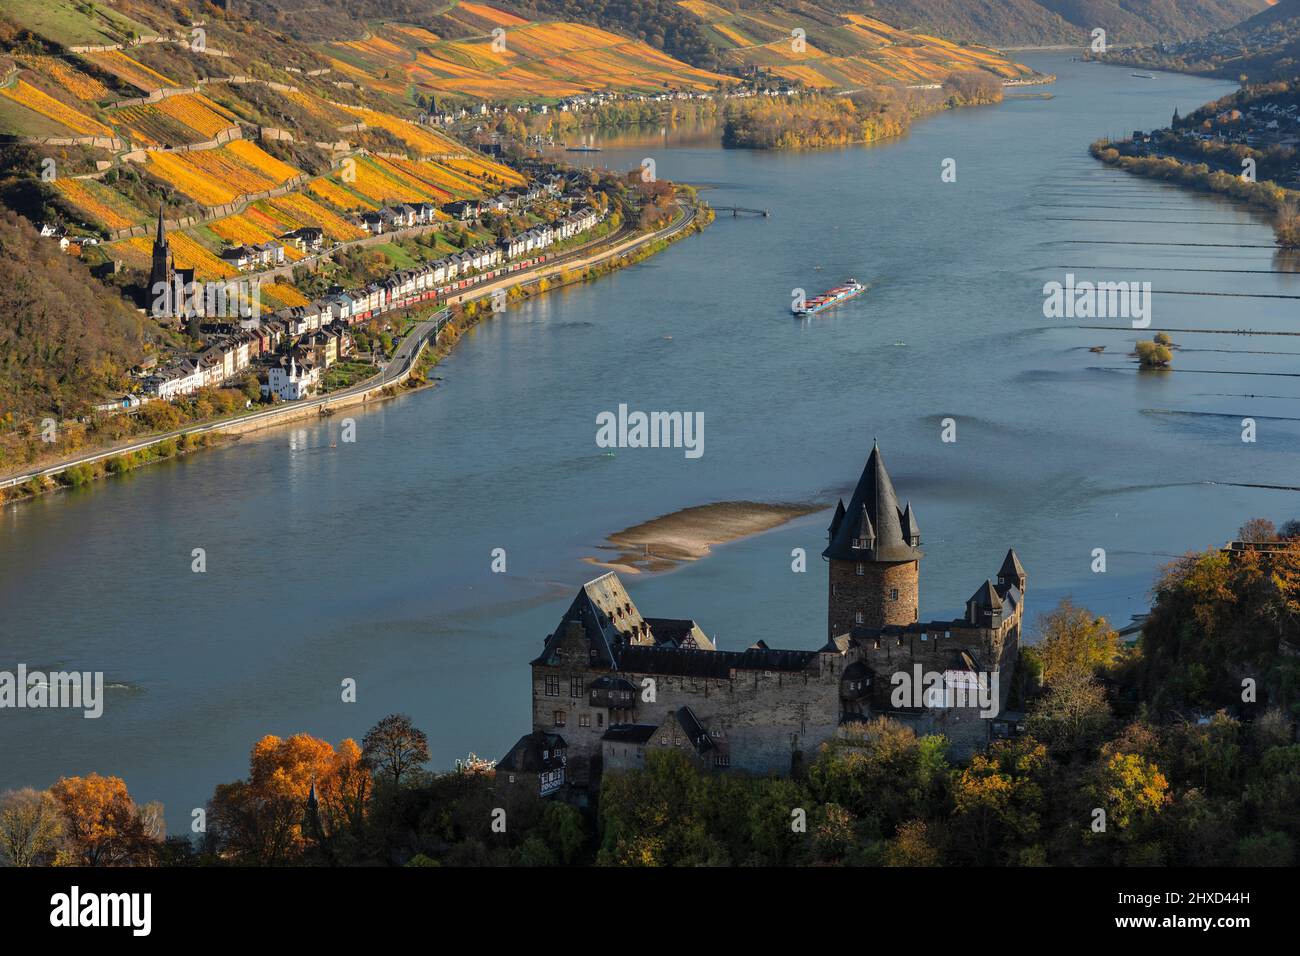 View over Stahleck Castle to Lorch, Bacharach, Upper Middle Rhine Valley, Rhineland-Palatinate, Germany Stock Photo